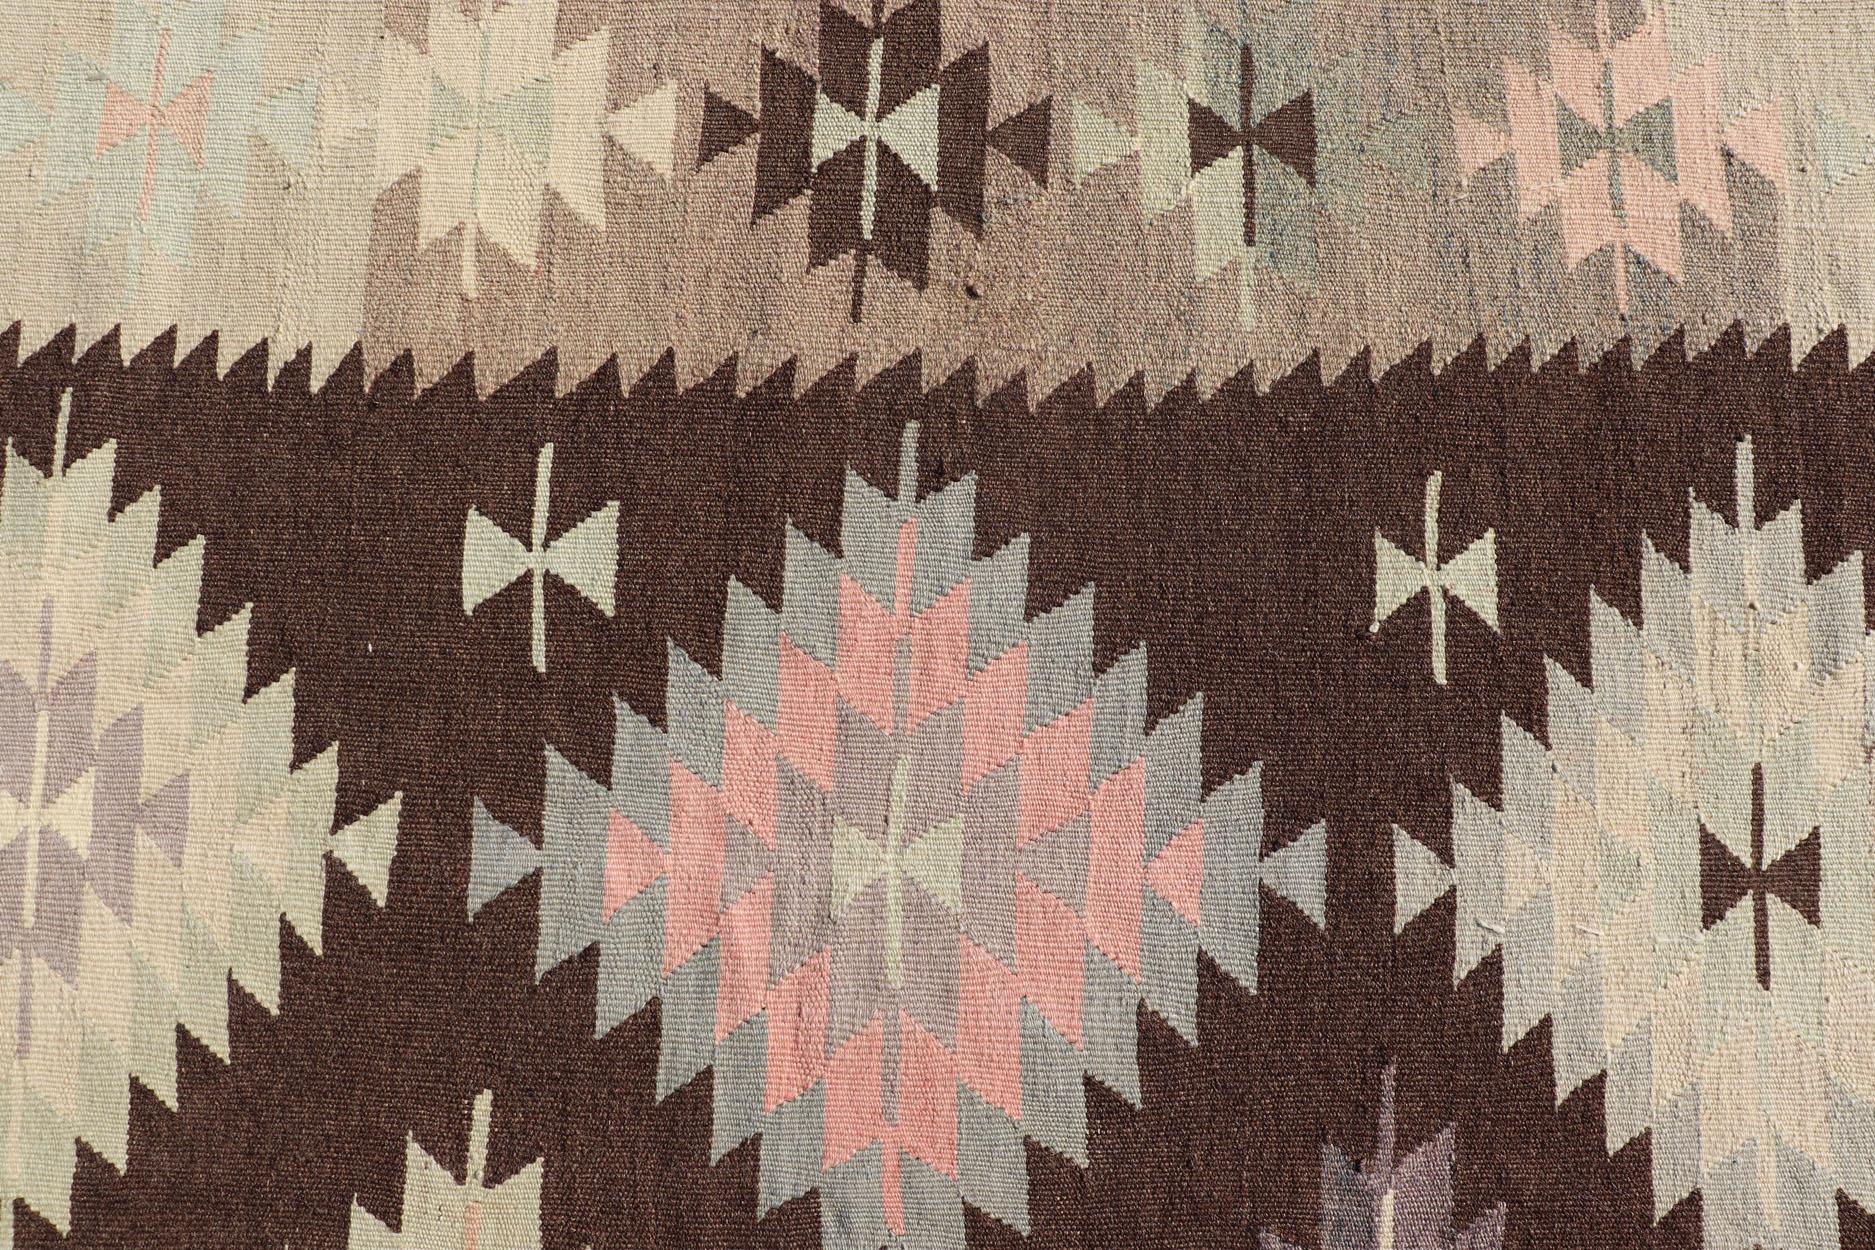 Tribal and Geometrics Turkish Kilim in Brown with Cream, Pink, Light Gray/Blue For Sale 6